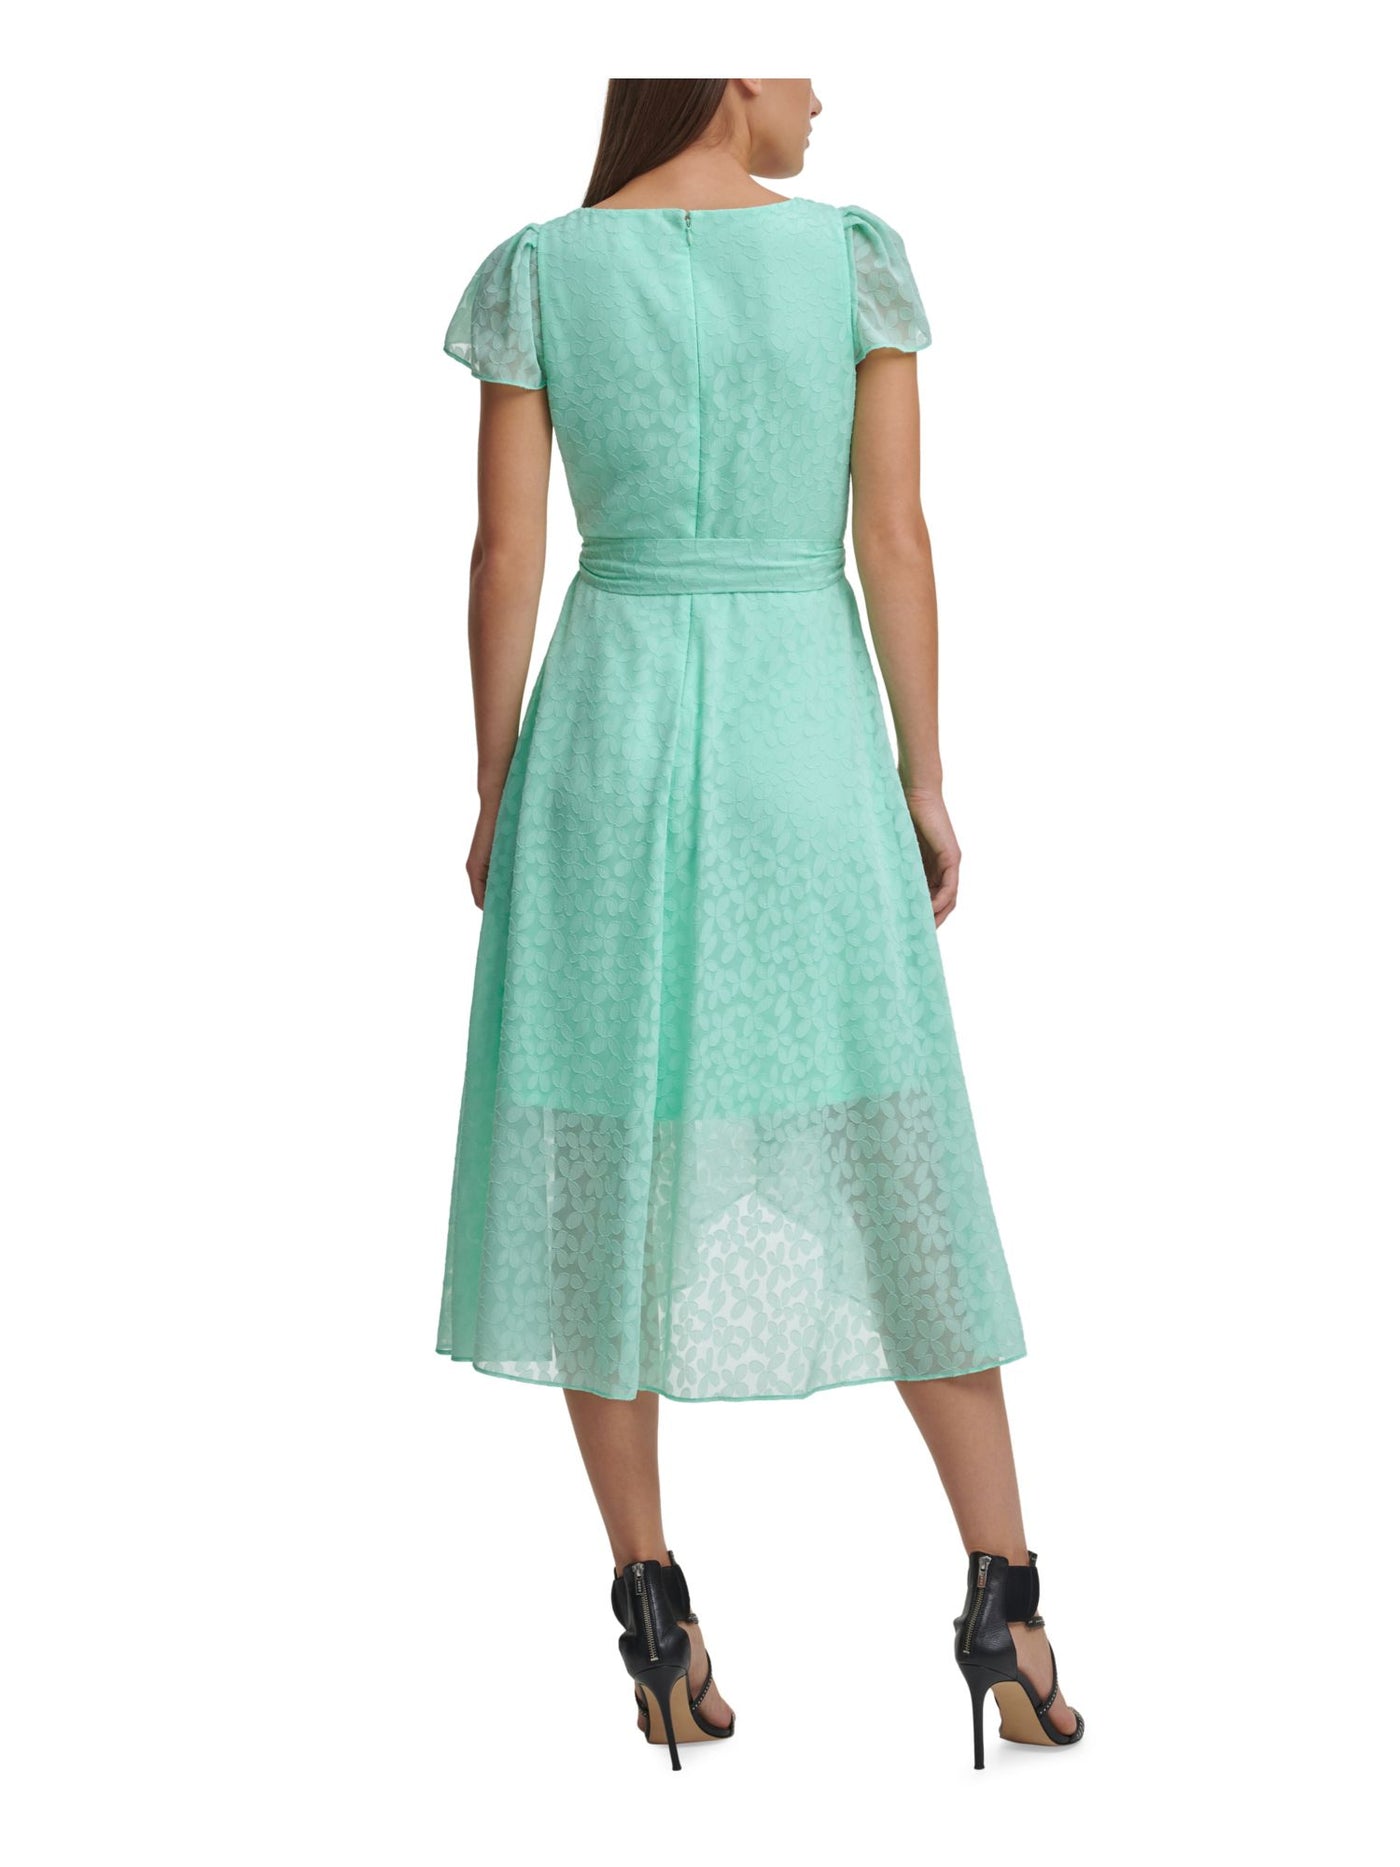 DKNY Womens Green Textured Belted Zippered Flutter Sleeve Surplice Neckline Midi Party Faux Wrap Dress 14